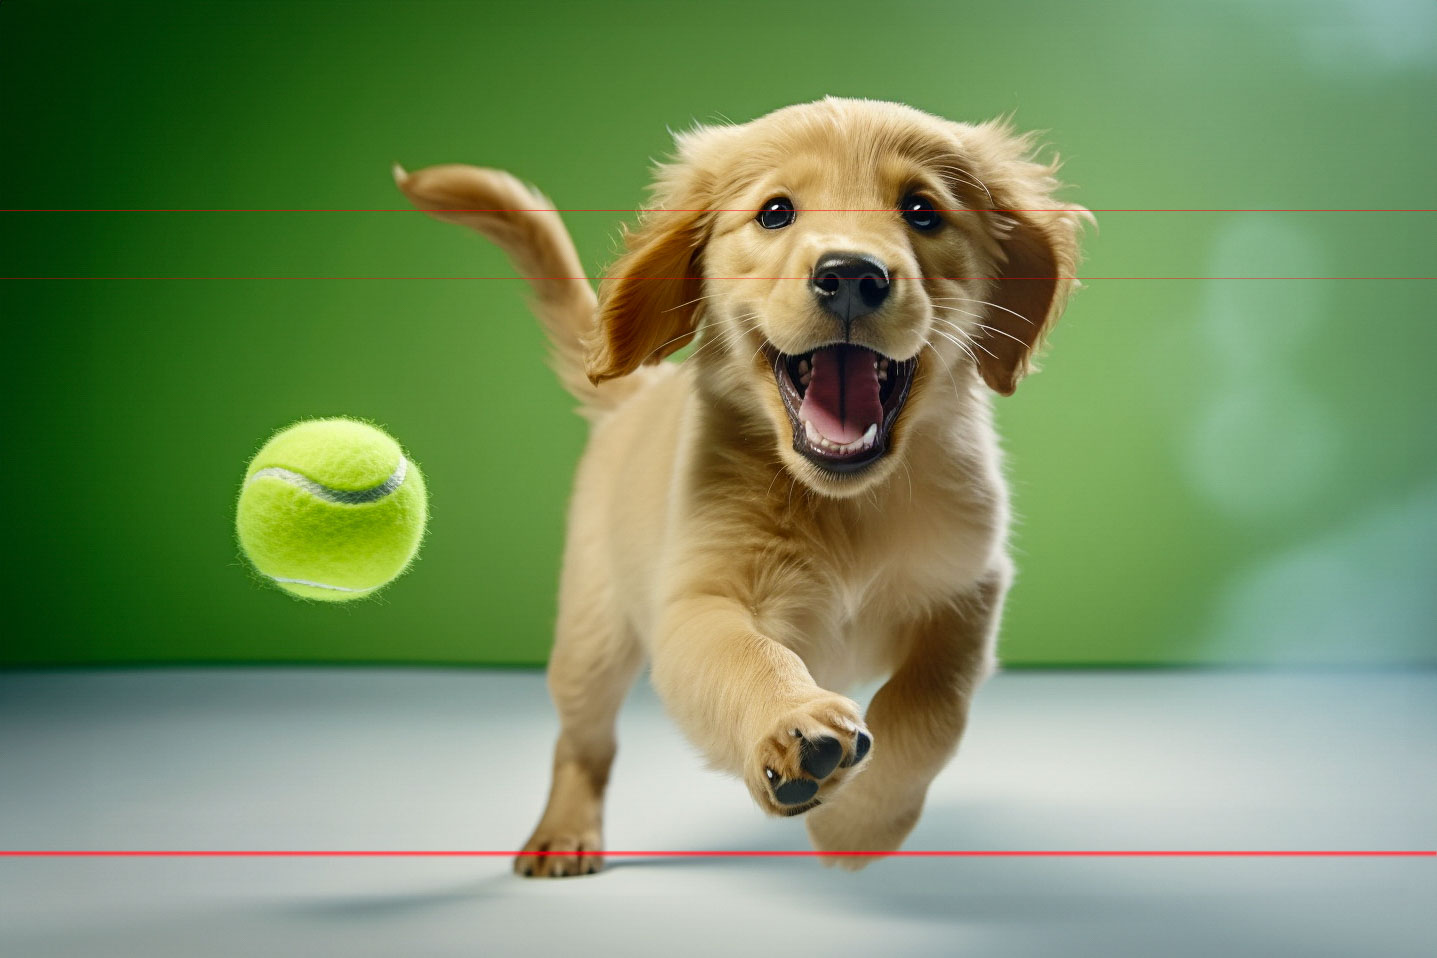 A playful golden retriever puppy joyfully bounds towards the viewer of the picture, mouth open and ears flapping, against a green gradient background. The puppy’s eyes are wide with excitement as it chases a green tennis ball in mid-air. The scene conveys energy and happiness.